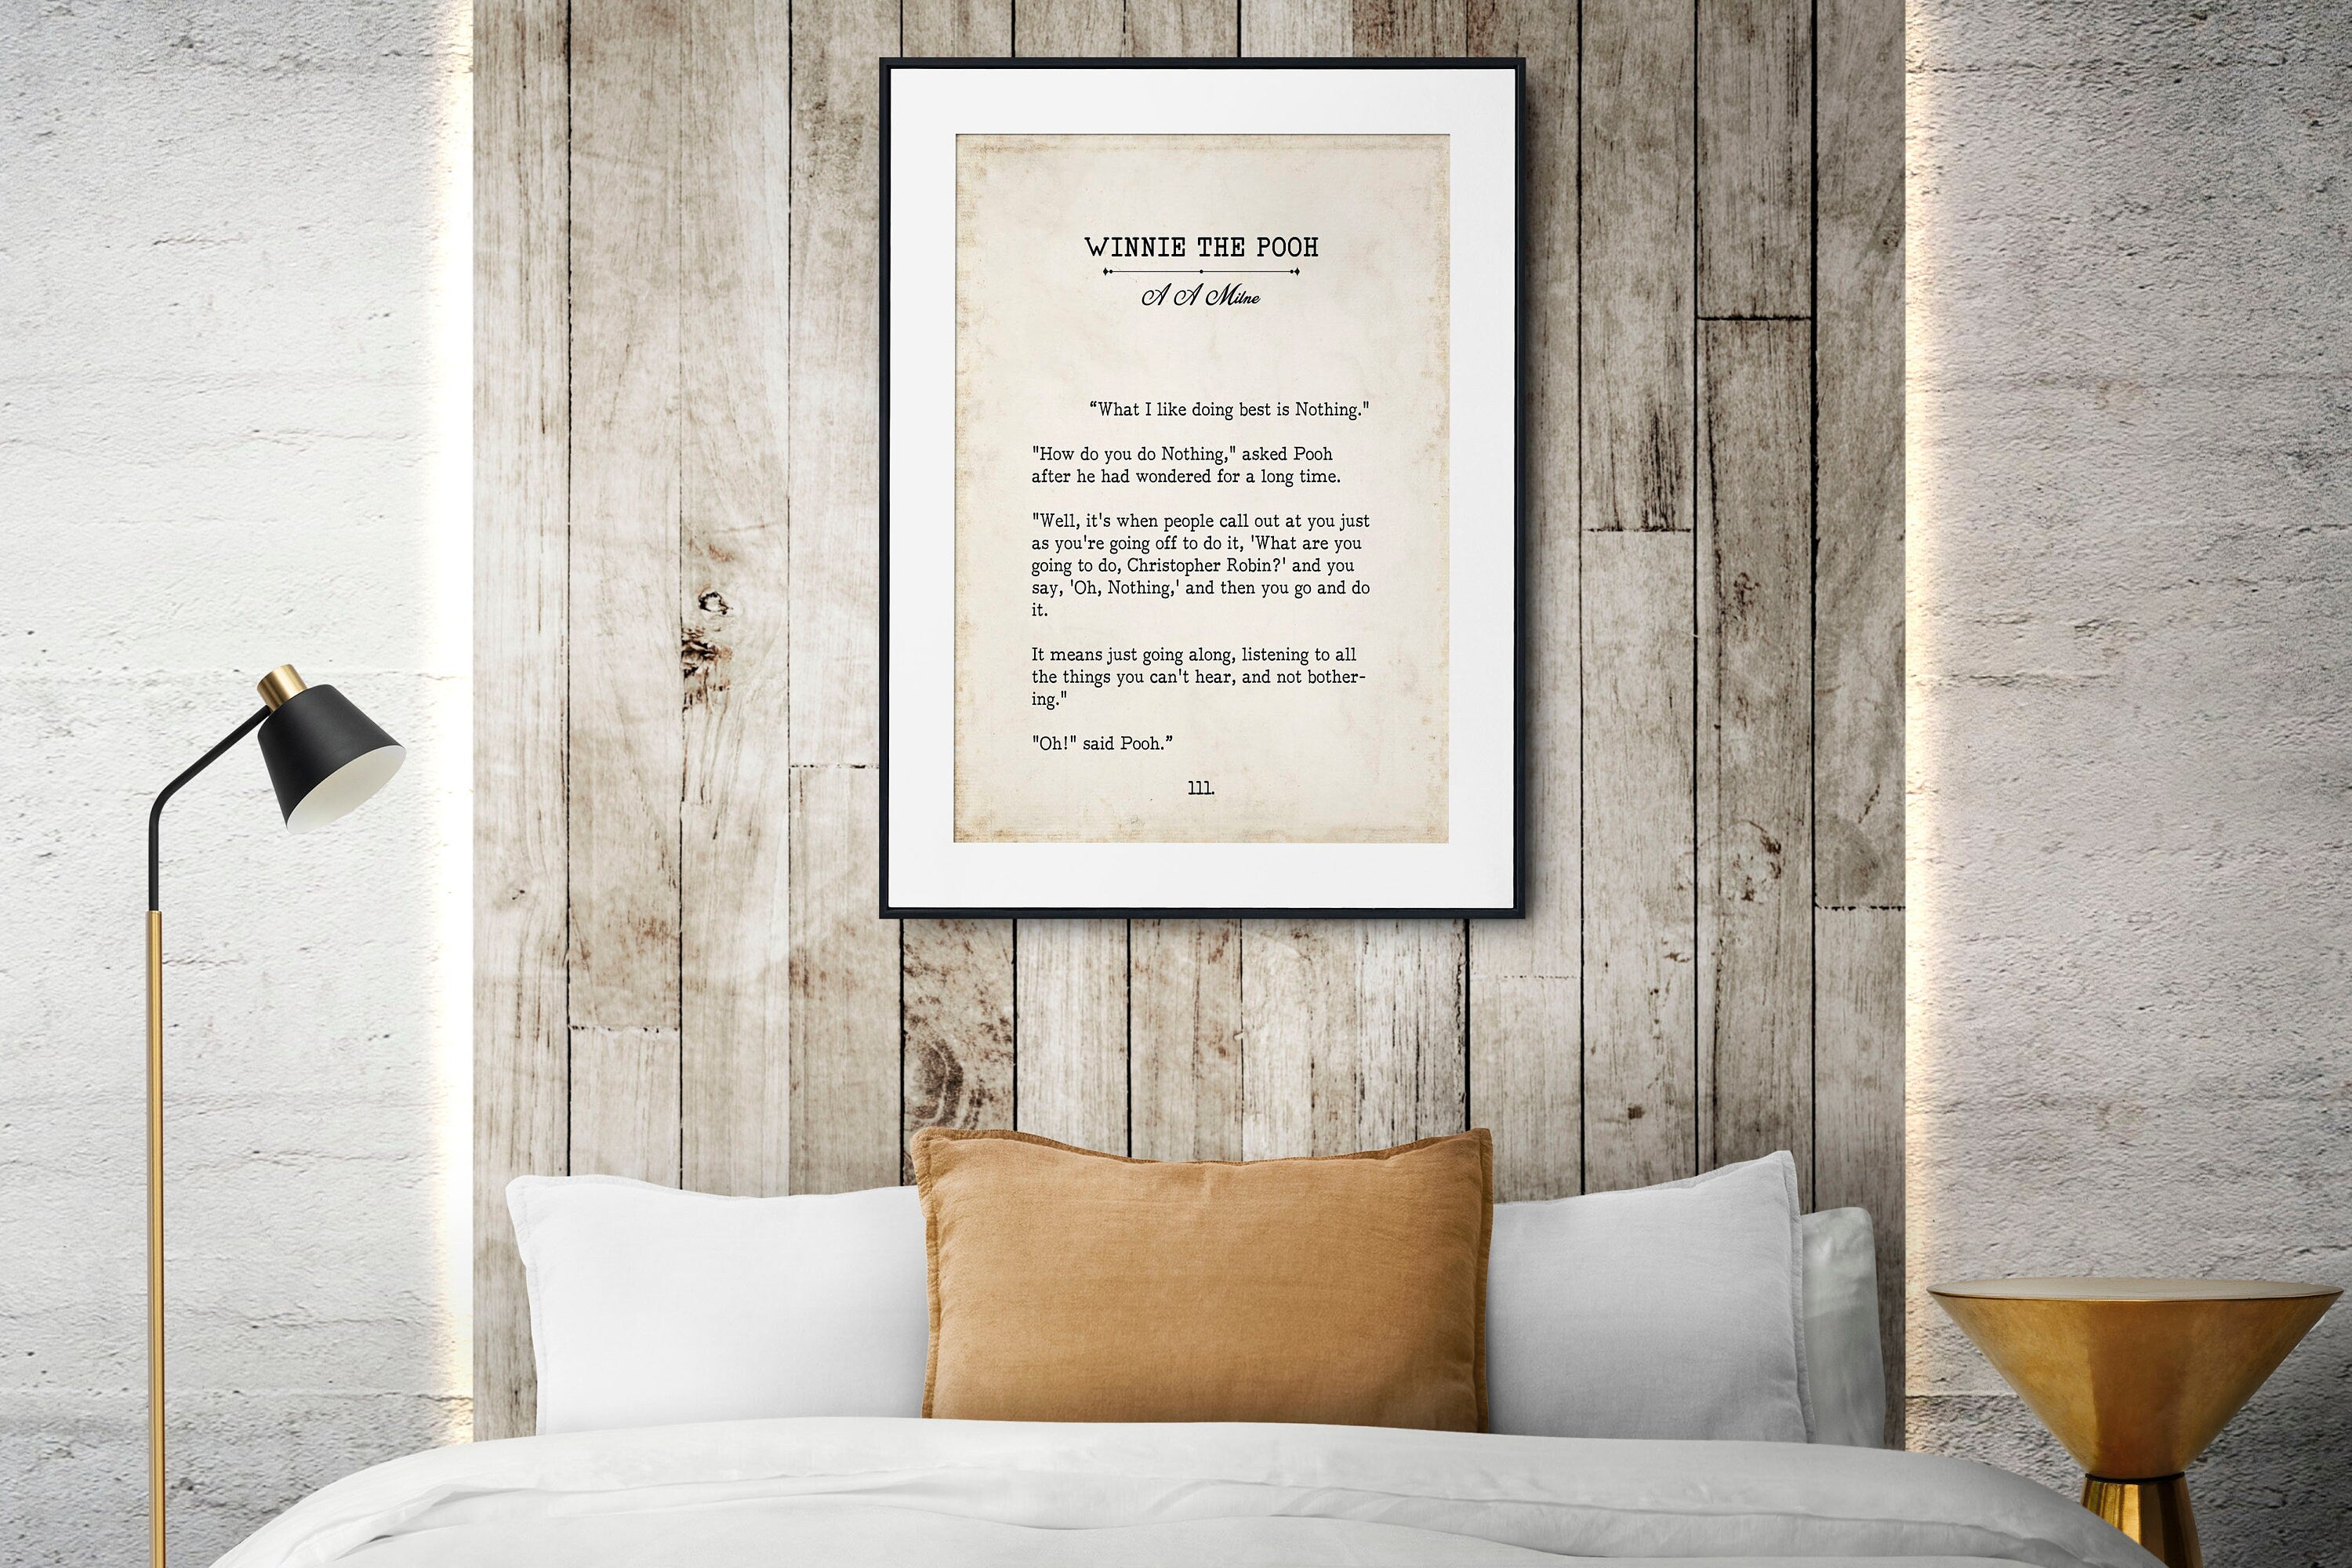 Winnie the Pooh Book Page Inspirational Wall Art, AA Milne Quote Vintage Style Print Wall Decor